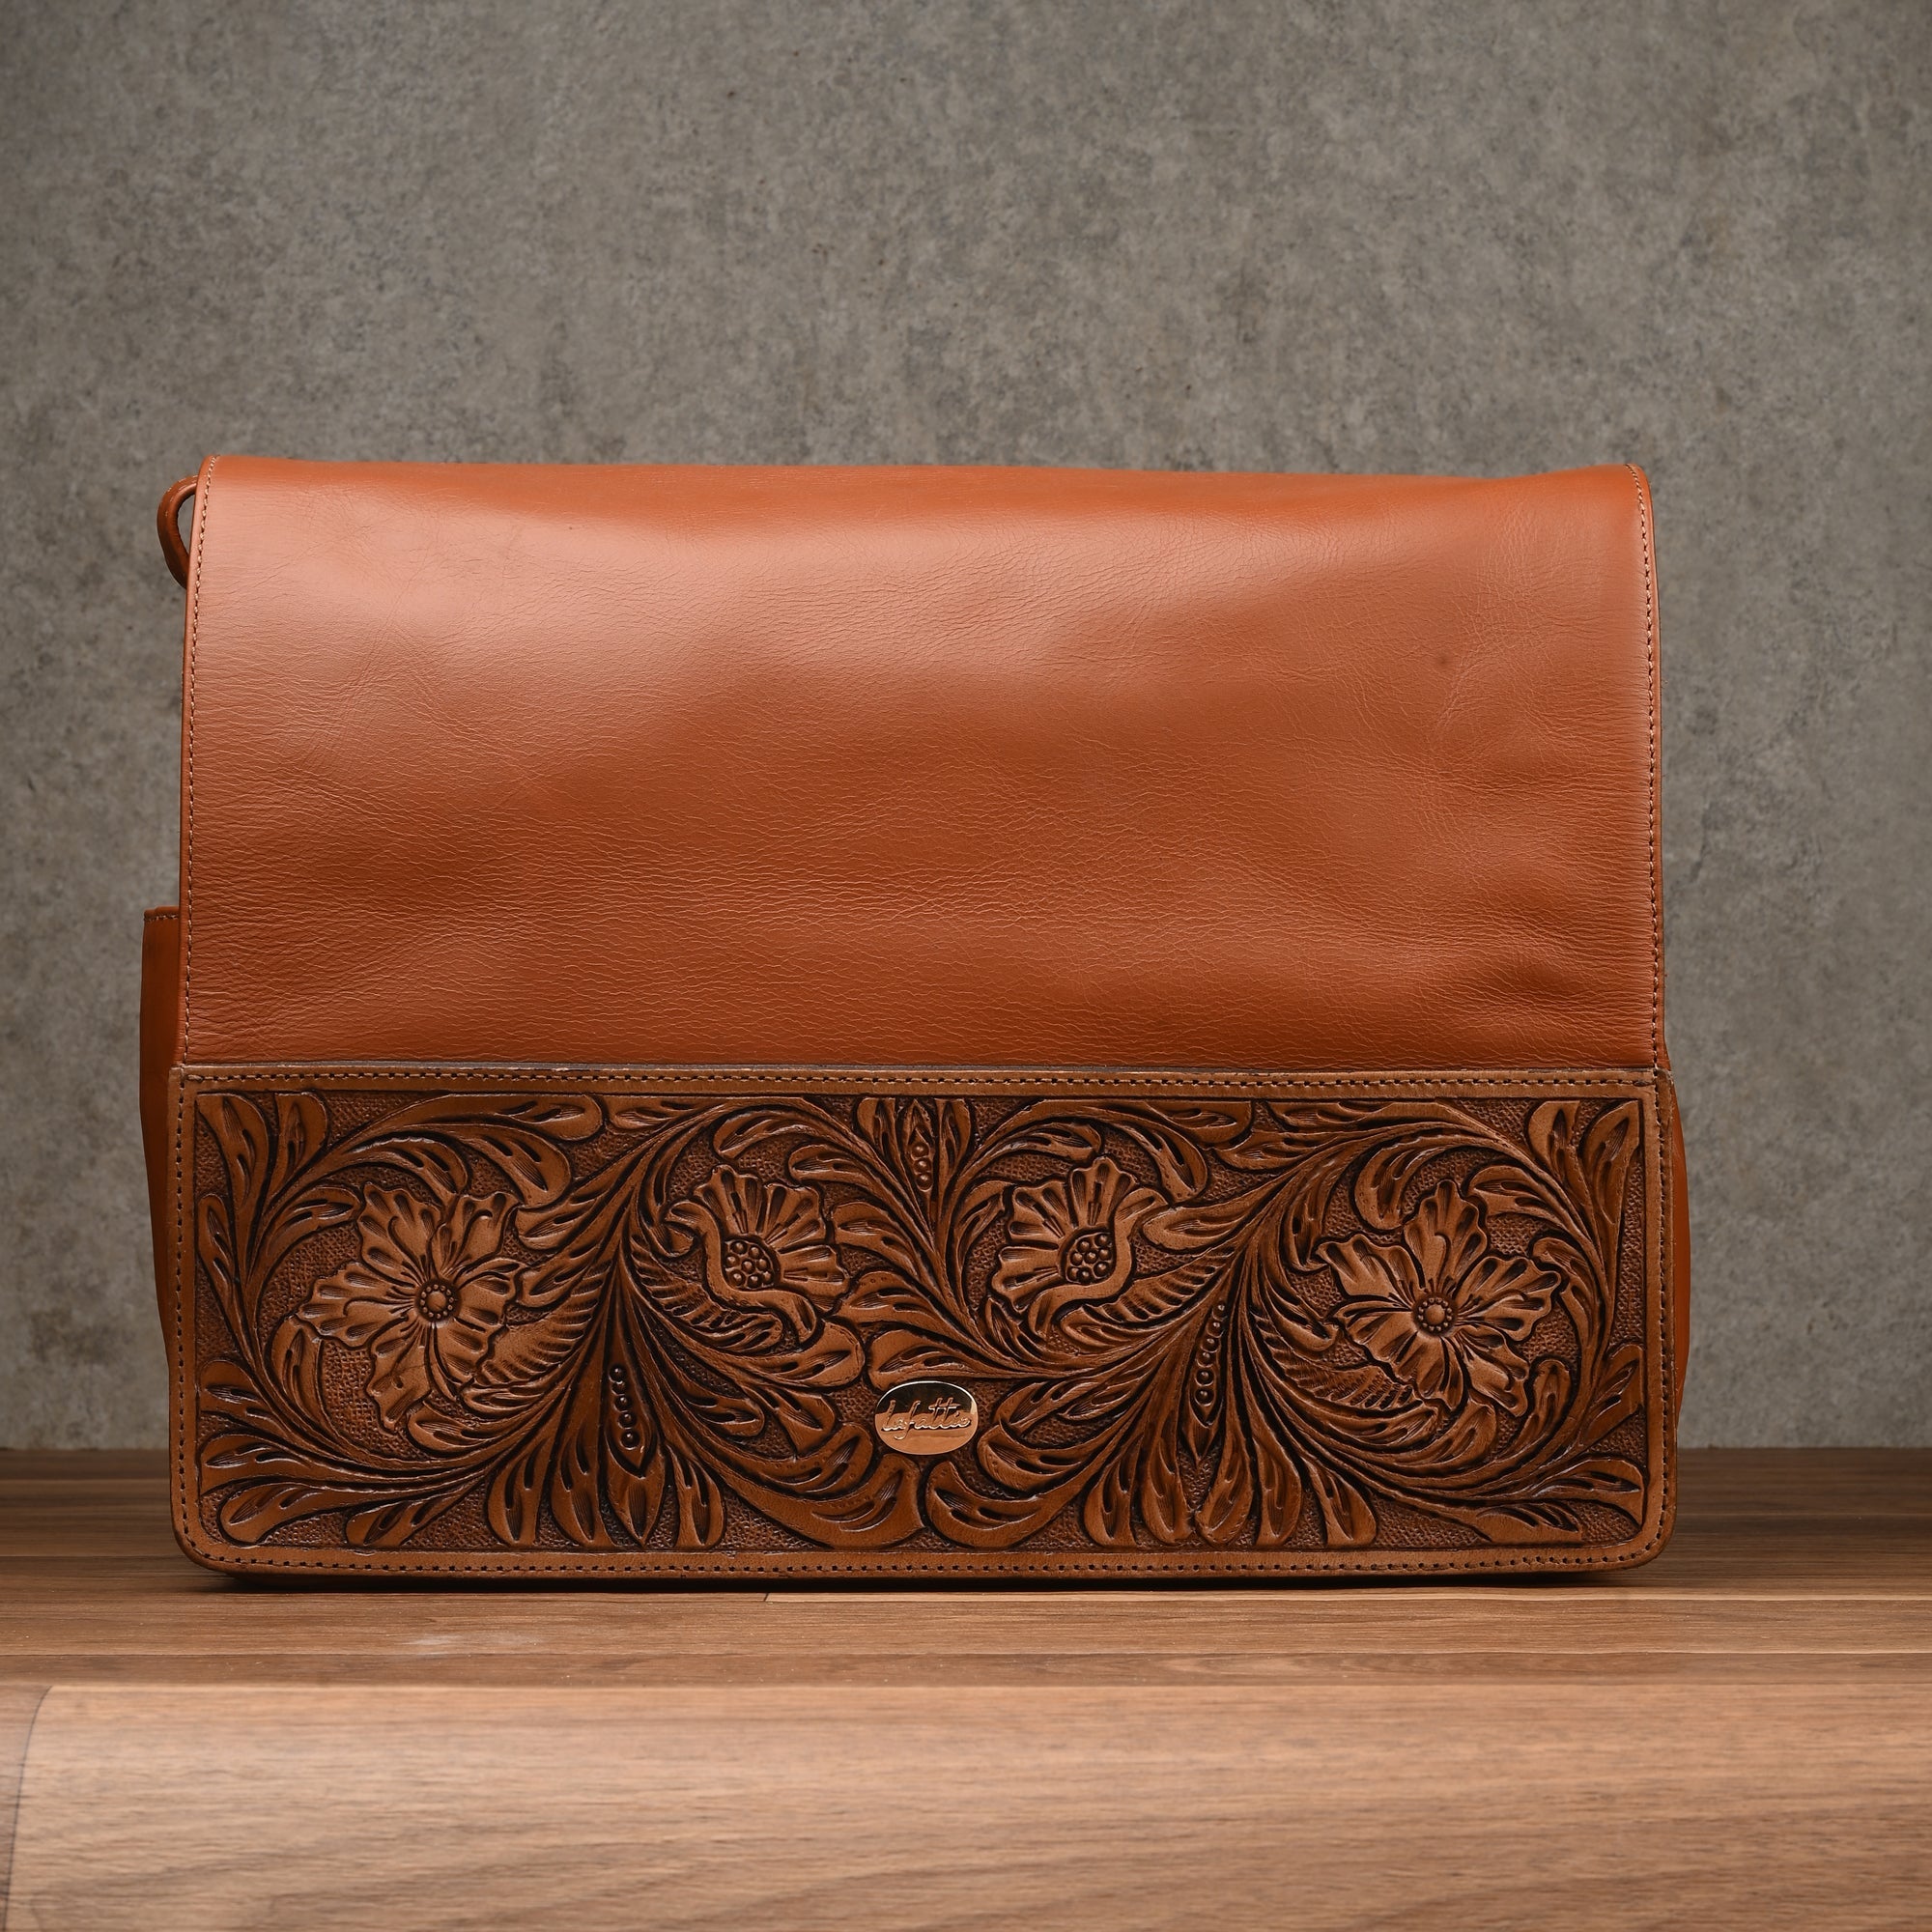 Hand-Carved Bags by Lafattio